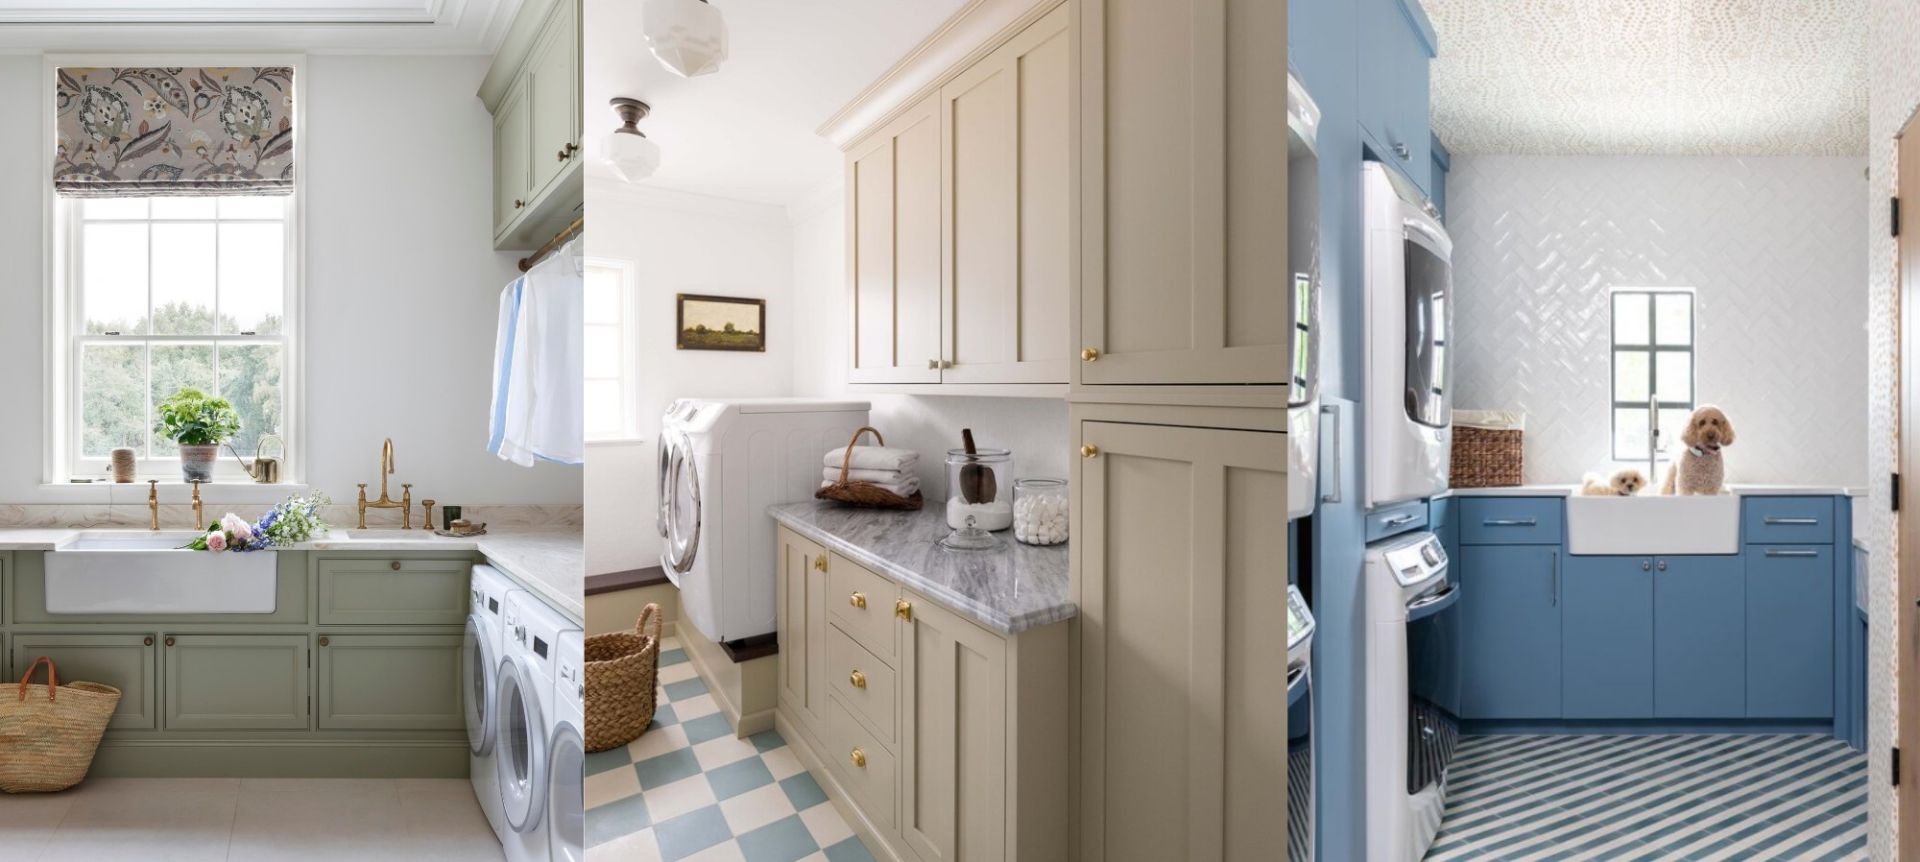 Laundry room ideas – 15 luxurious looks for your laundry room